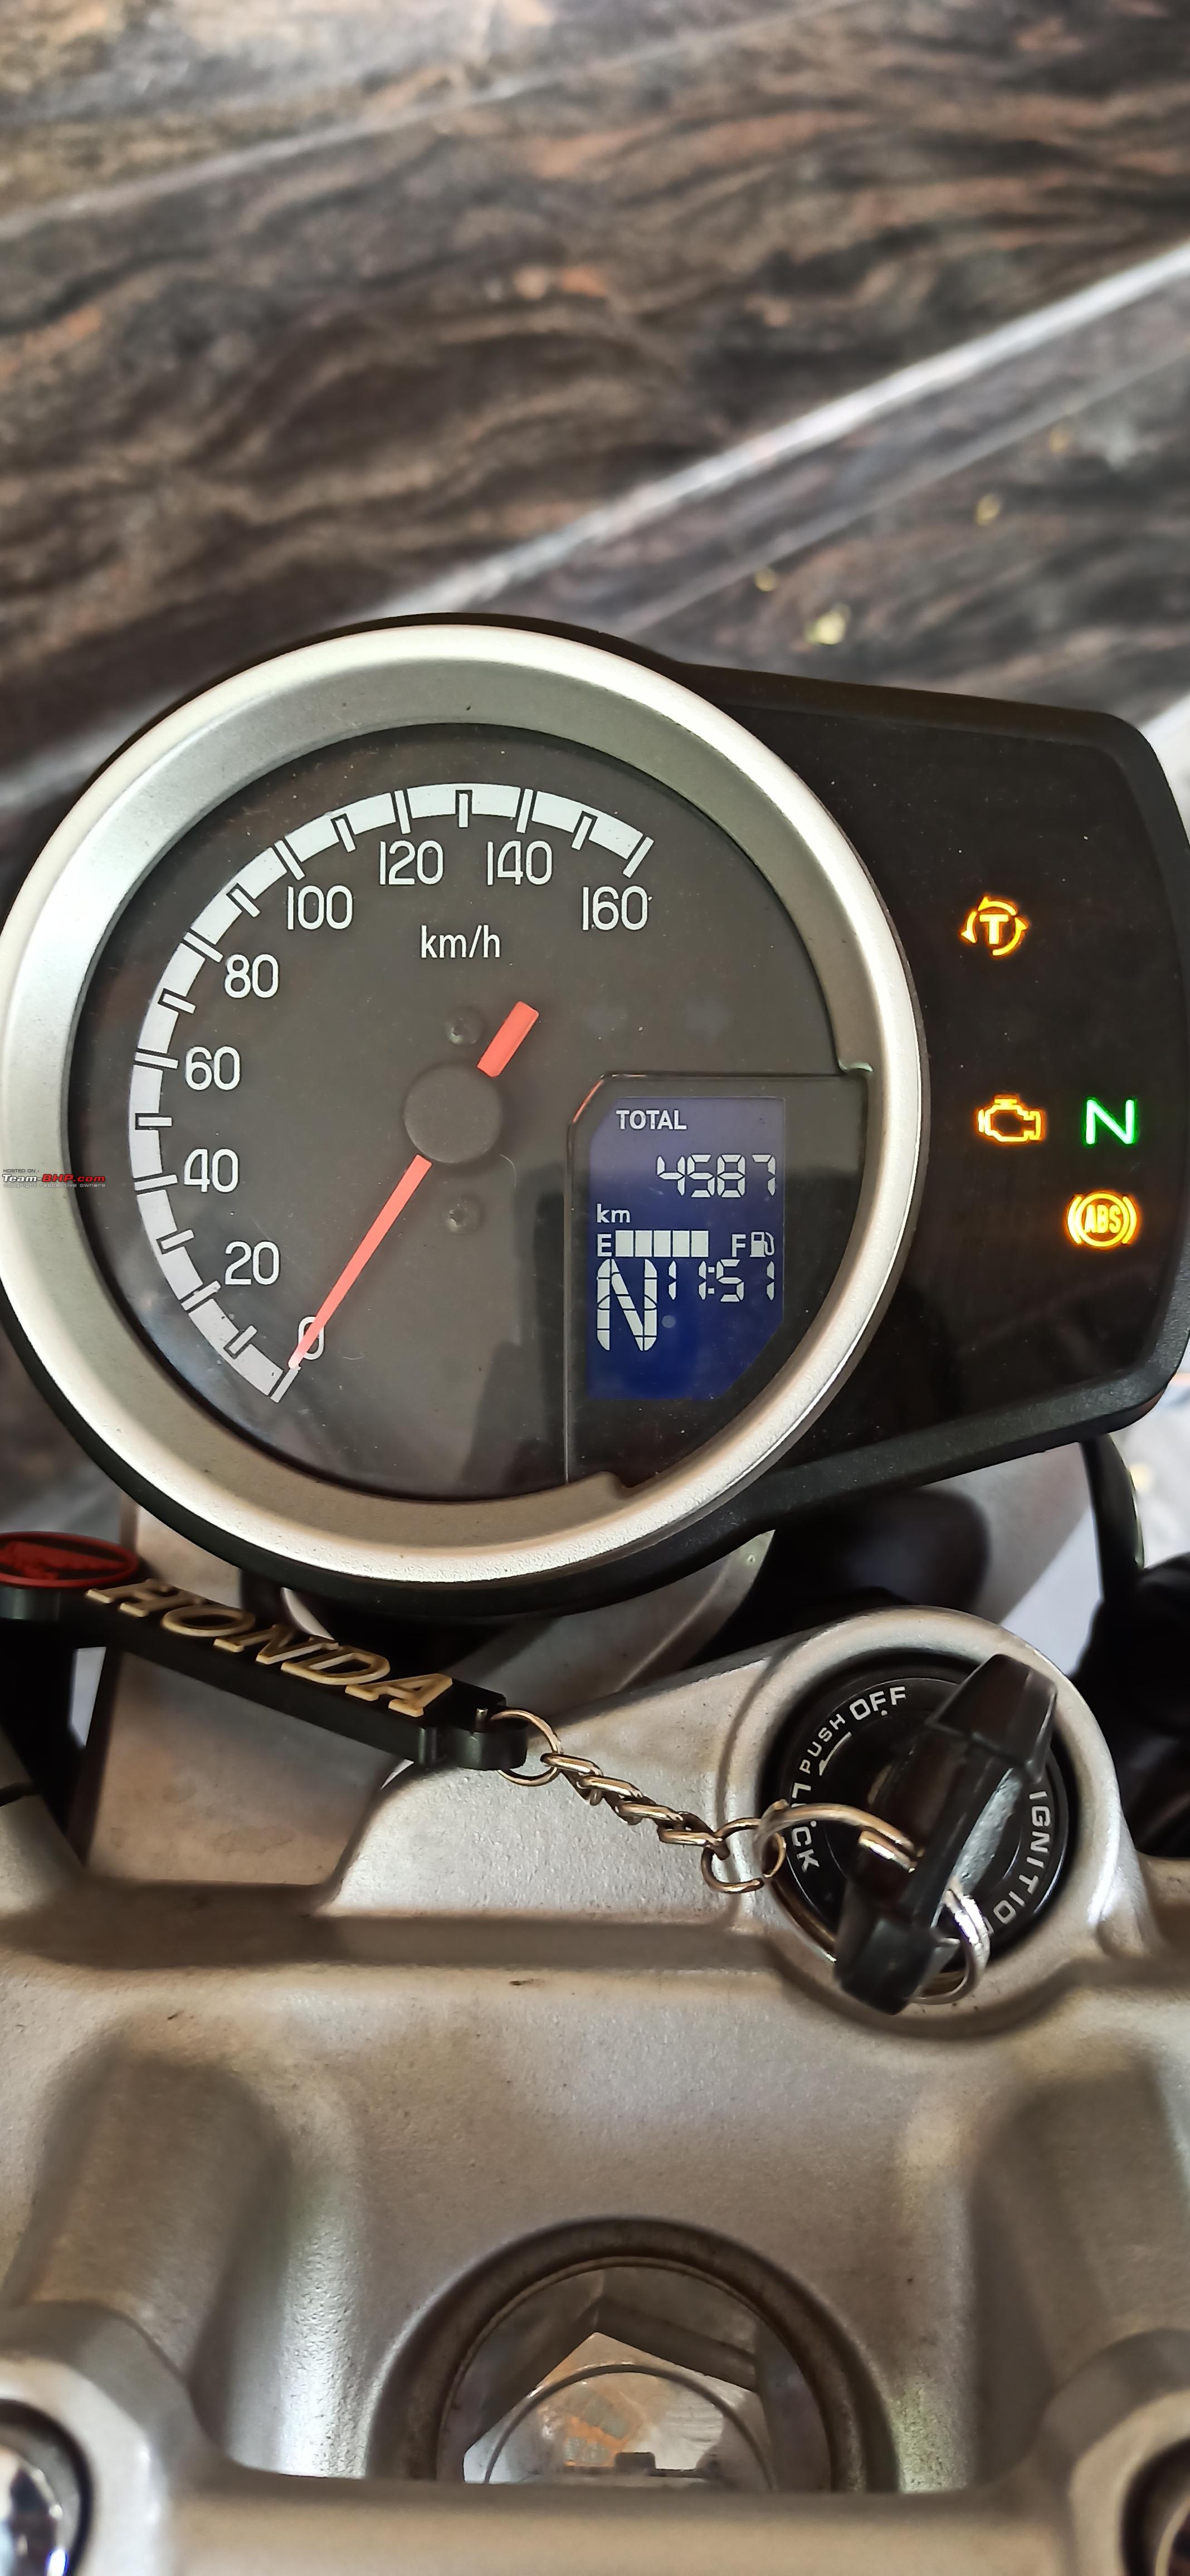 https://www.team-bhp.com/forum/attachments/motorbikes/2386781-oil-change-600-km-done-motorcycle-dealer-says-warranty-void-if-not-done-img_20221205_114834.jpg